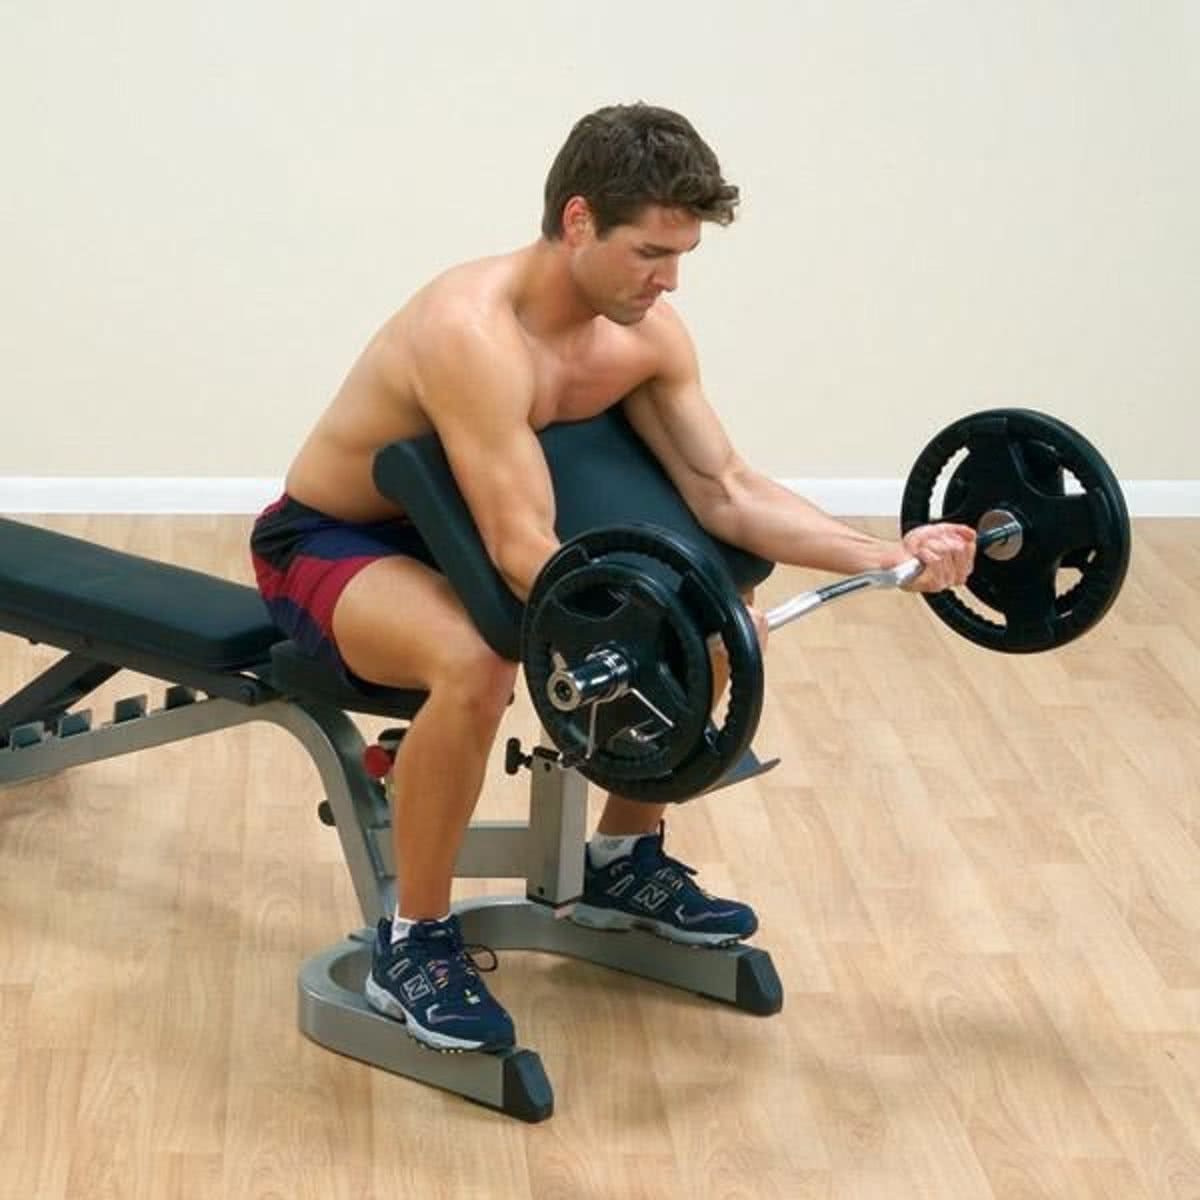 Body-Solid Preacher Curl Station